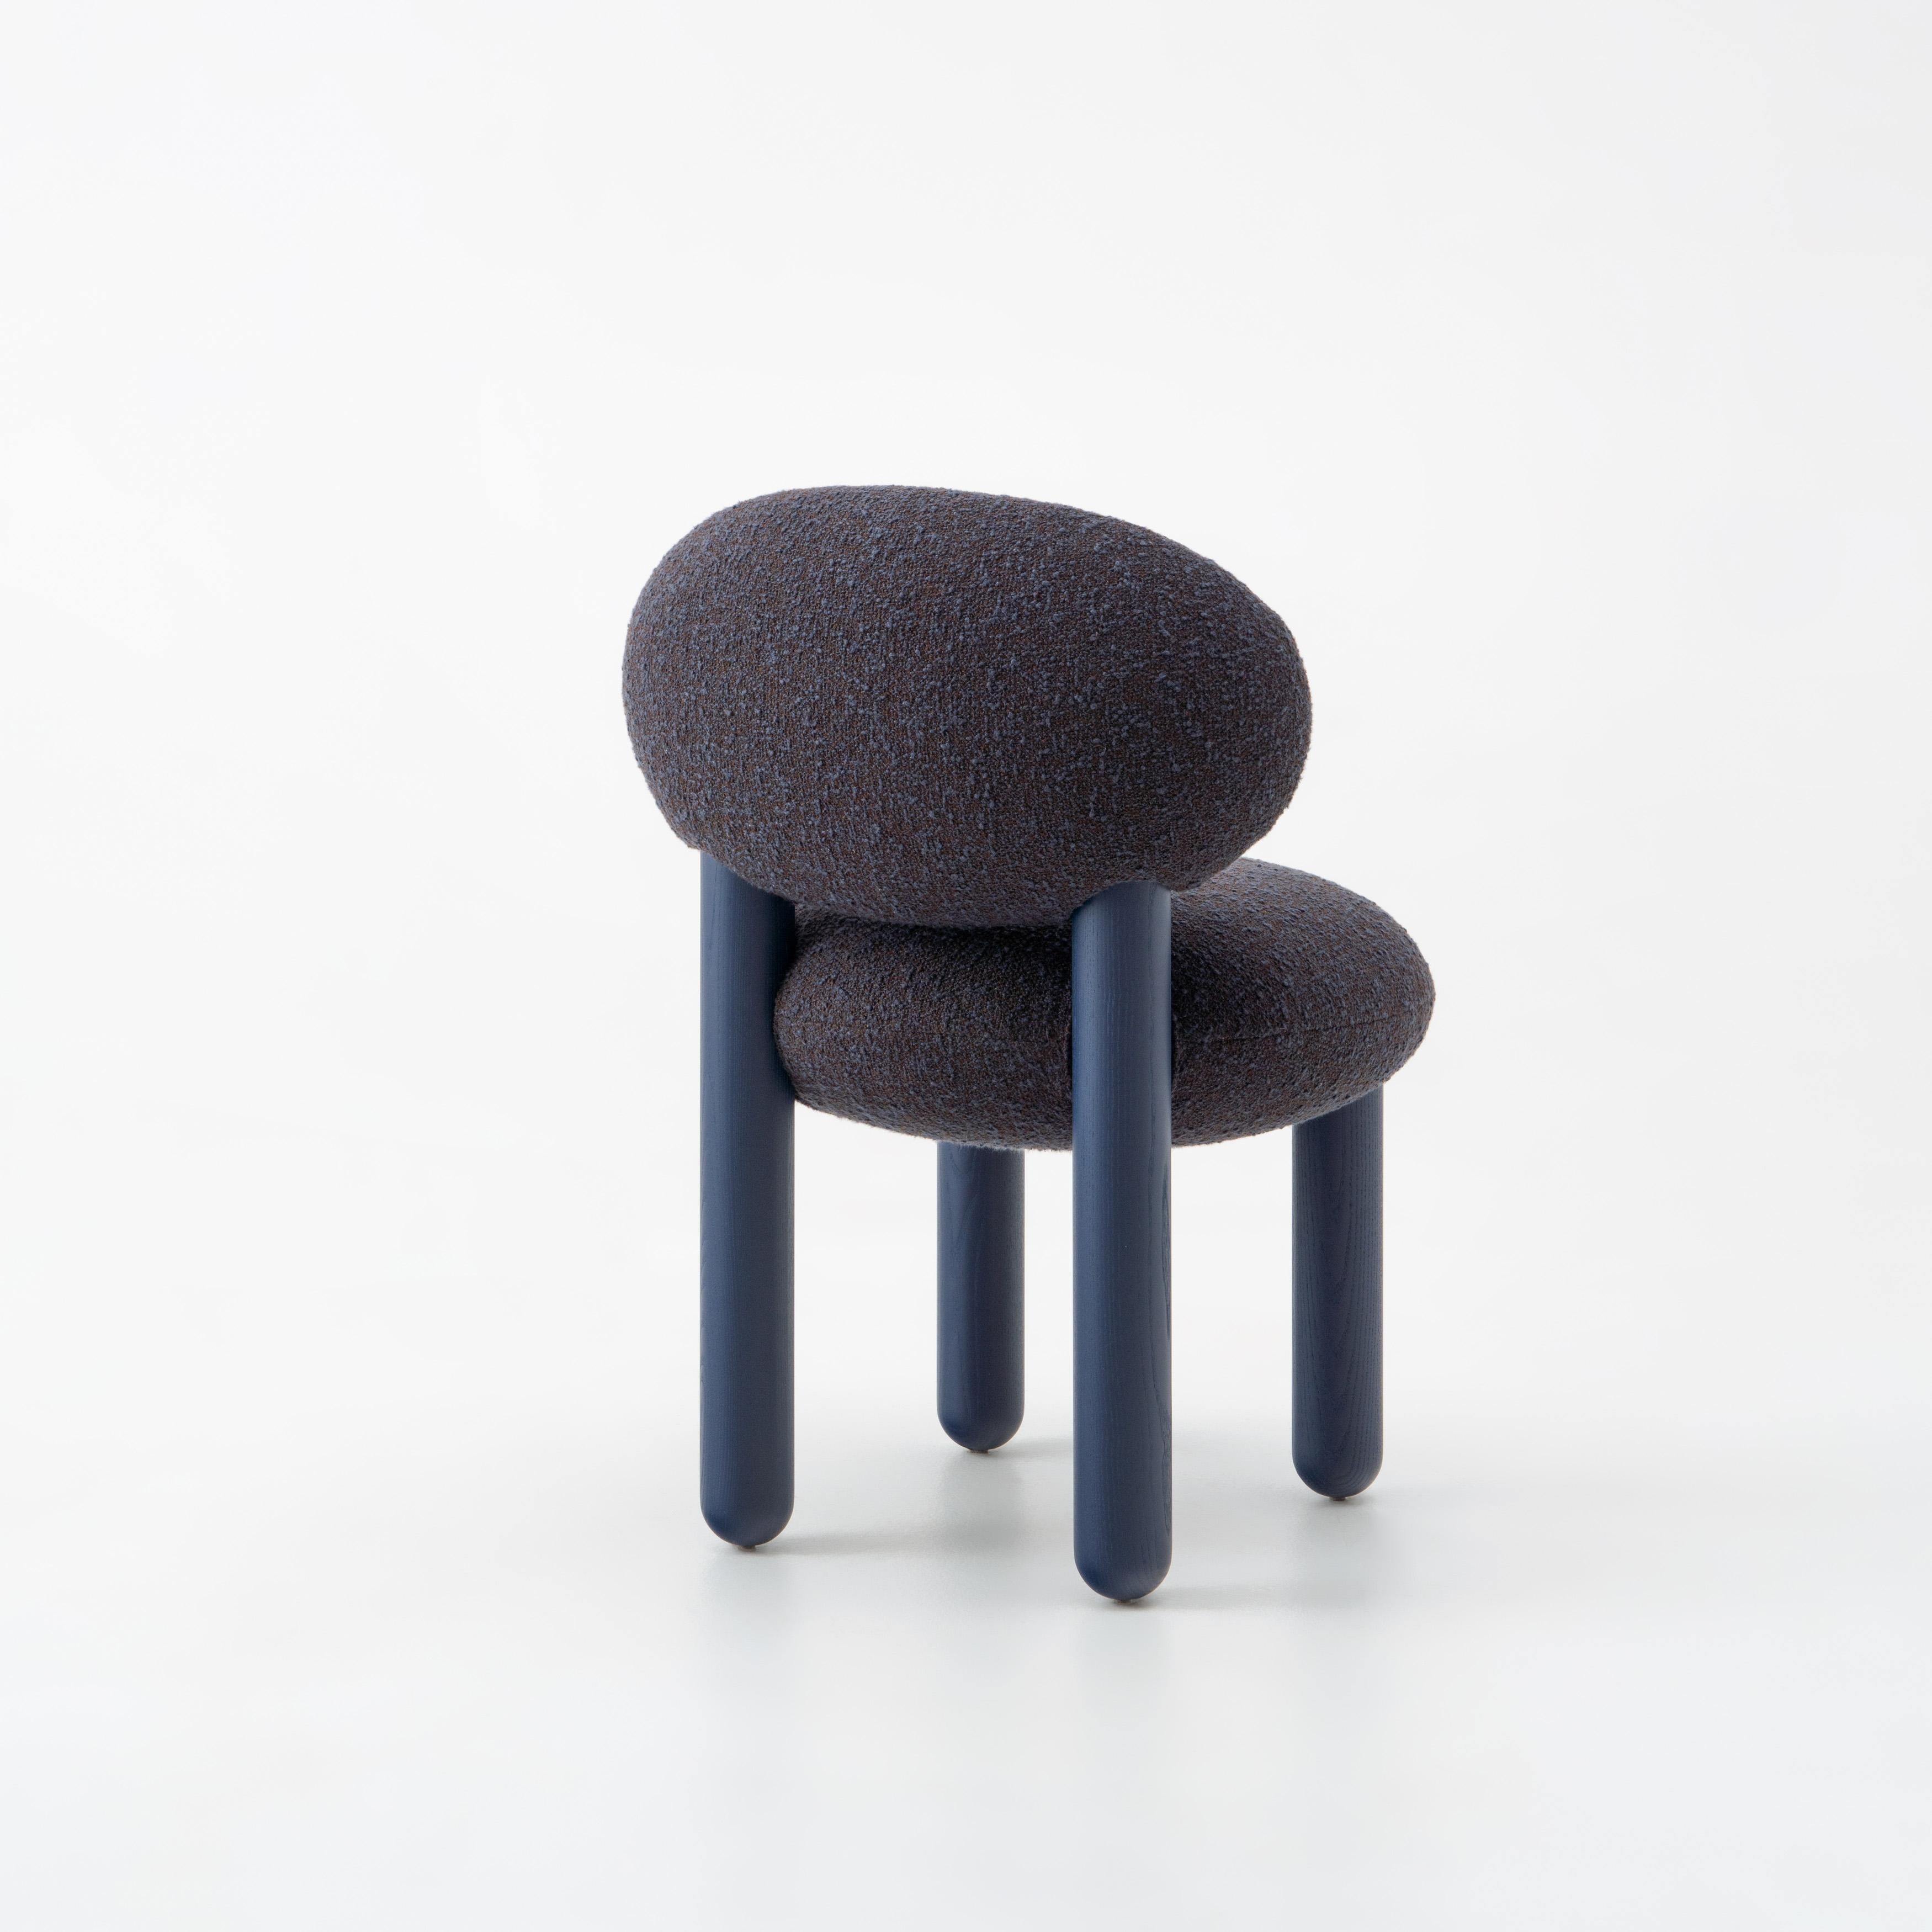 Dining Chair Flock CS2
Designer: Kateryna Sokolova for Noom

Model shown in the main pictures: 
Legs: blue stained ashwood
Upholstery: Kvadrat, Zero col.06

The 